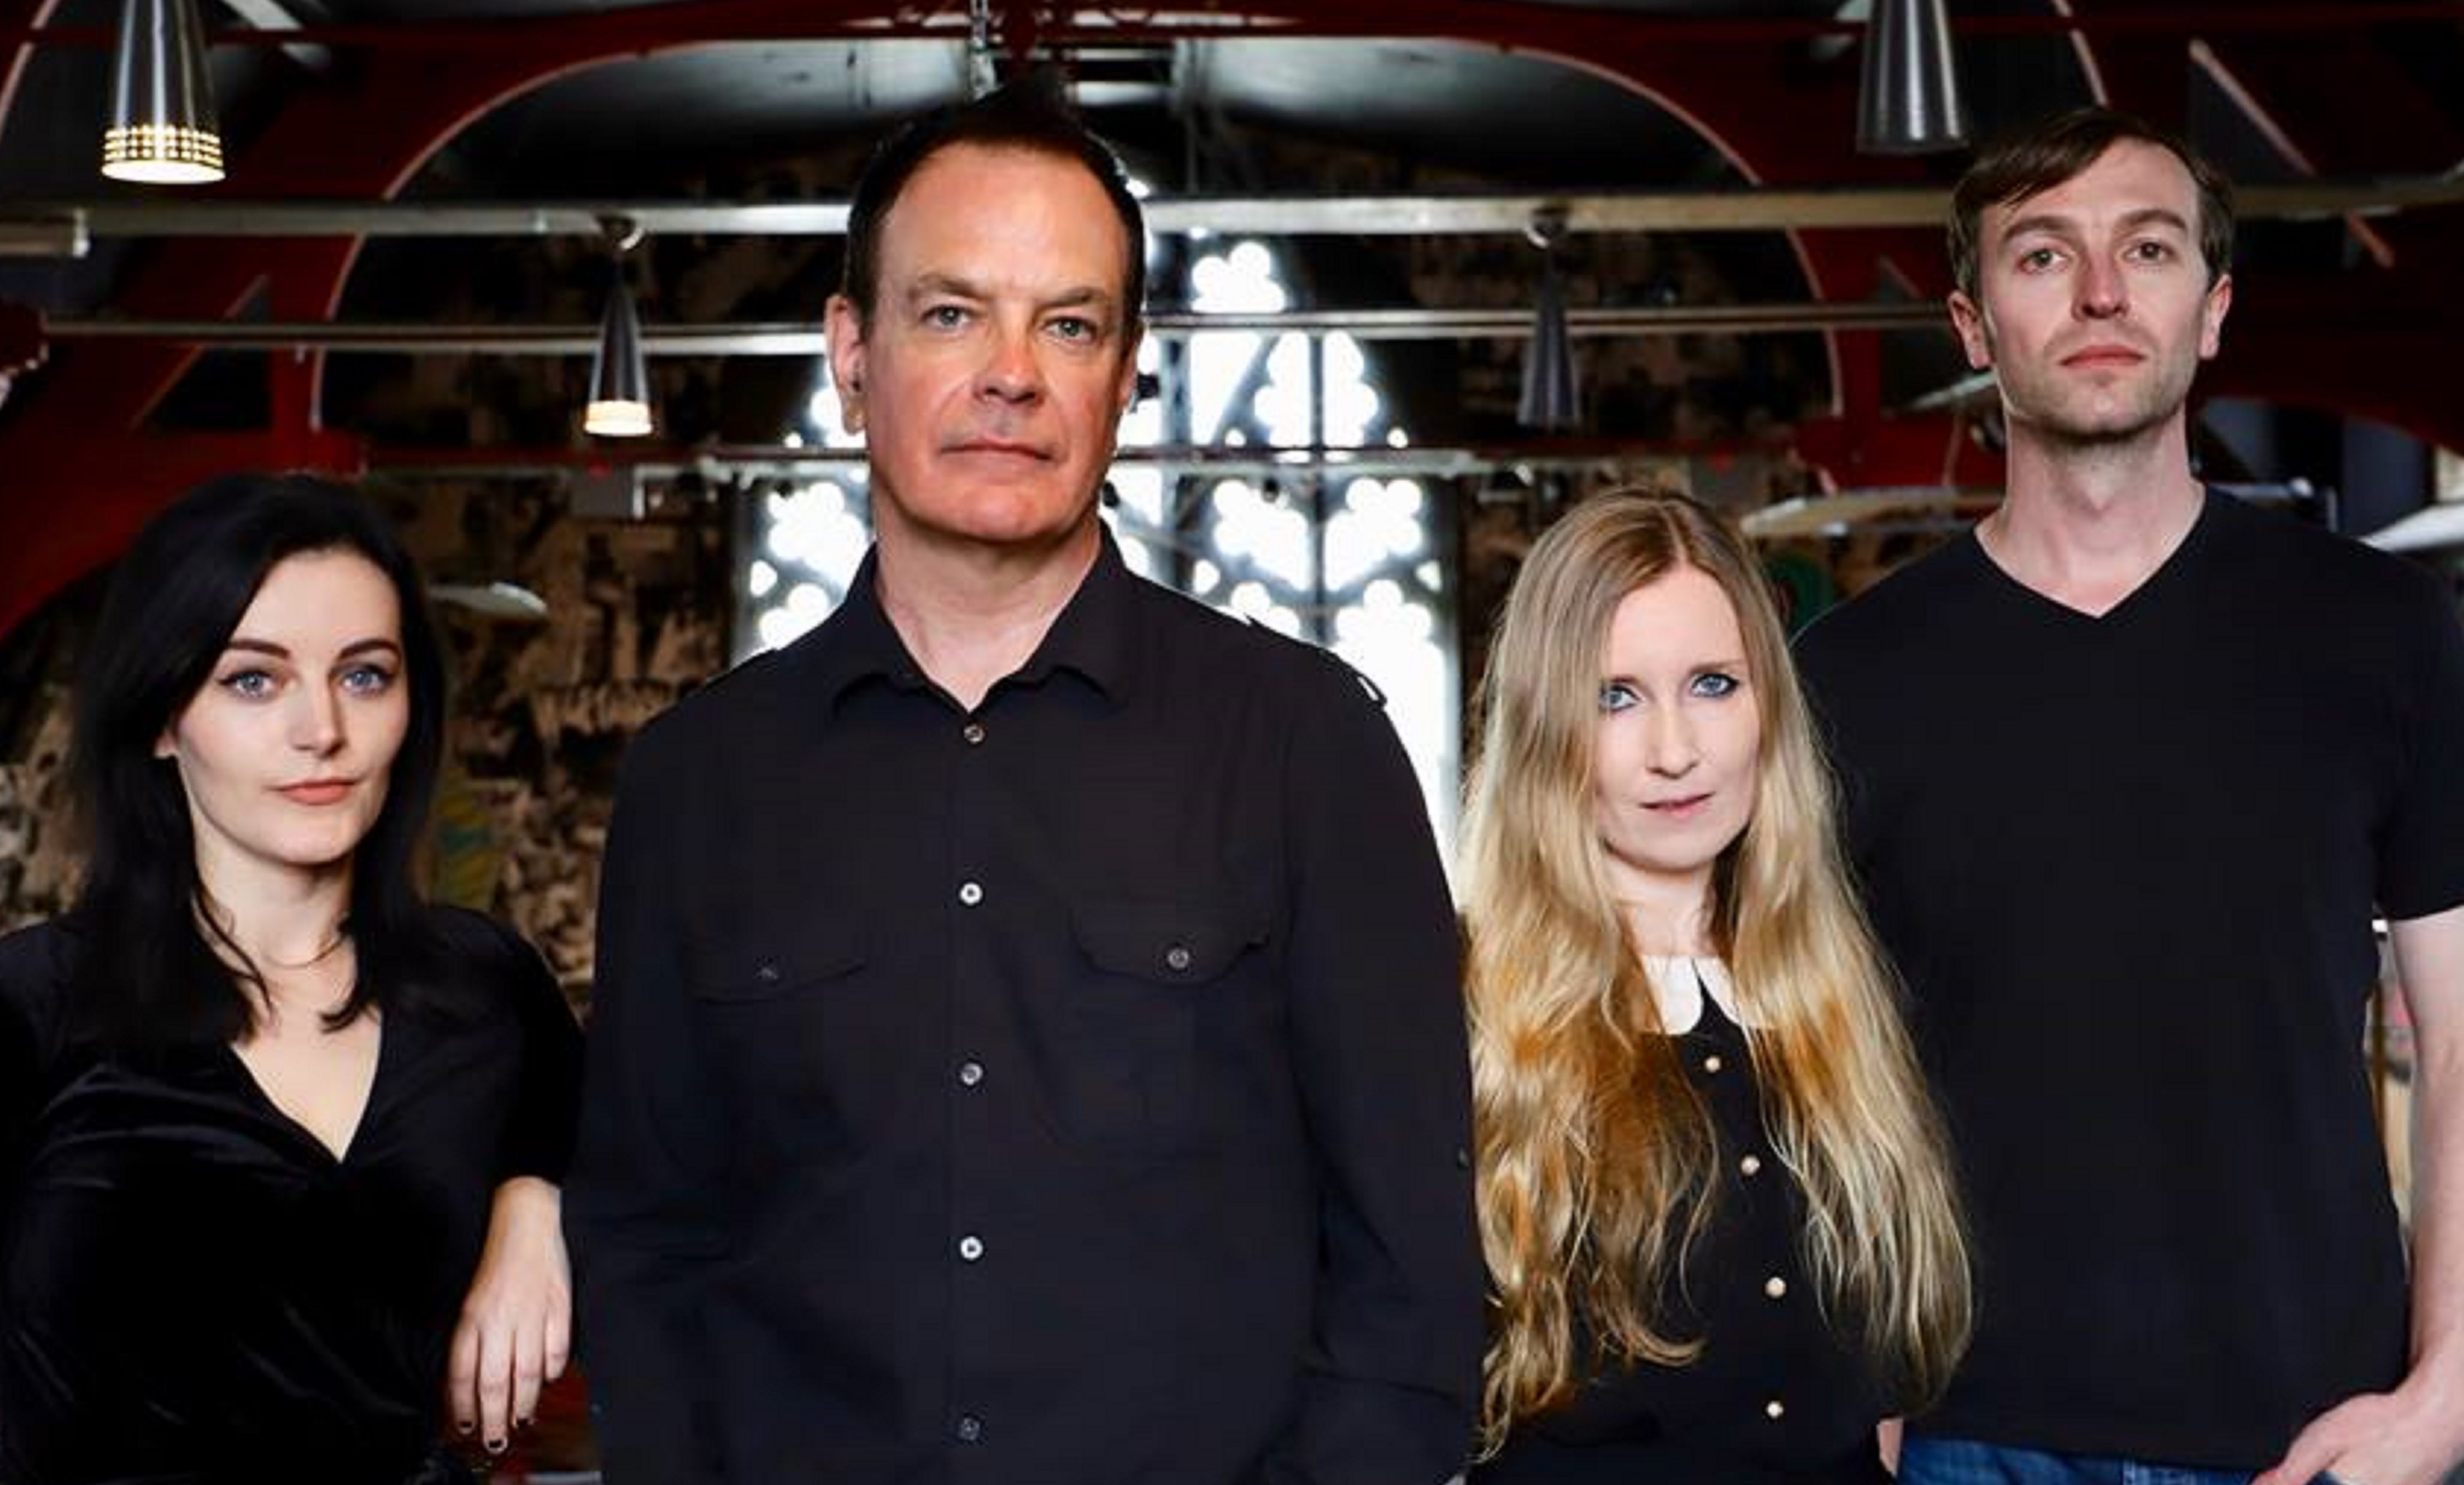 The Wedding Present with David Gedge, second left.